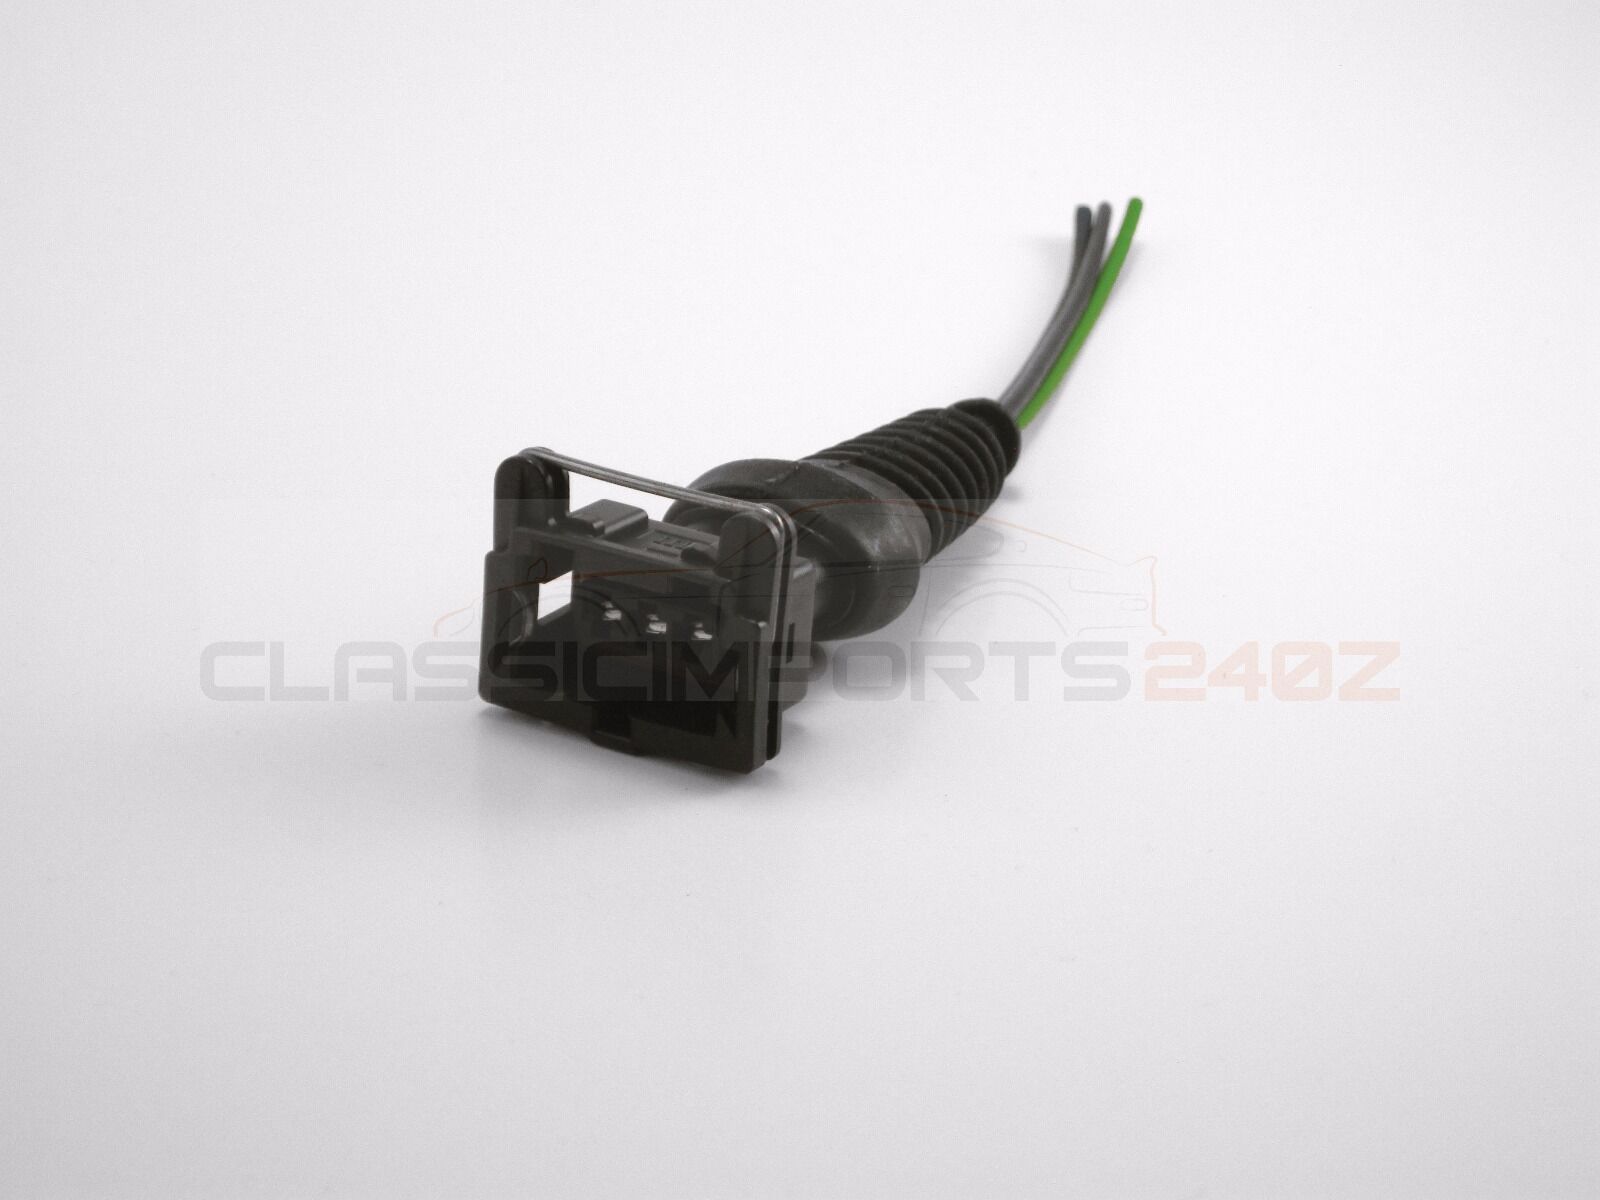 Throttle Position Sensor TPS Wiring Harness Connector for Nissan 300zx z31 z32